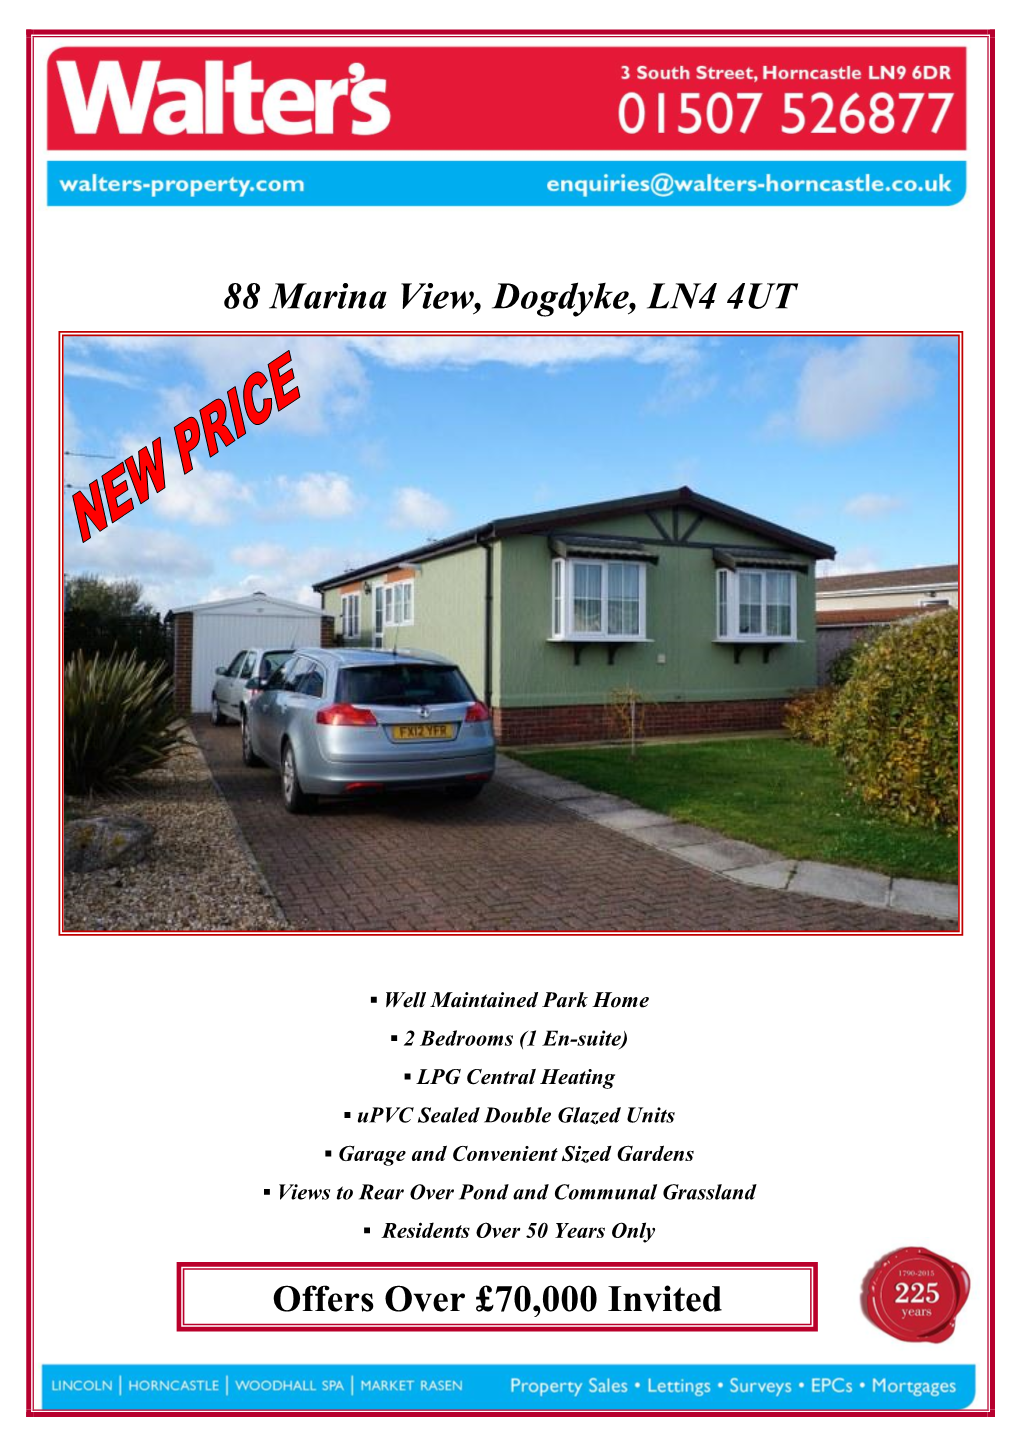 88 Marina View, Dogdyke, LN4 4UT Offers Over £70,000 Invited